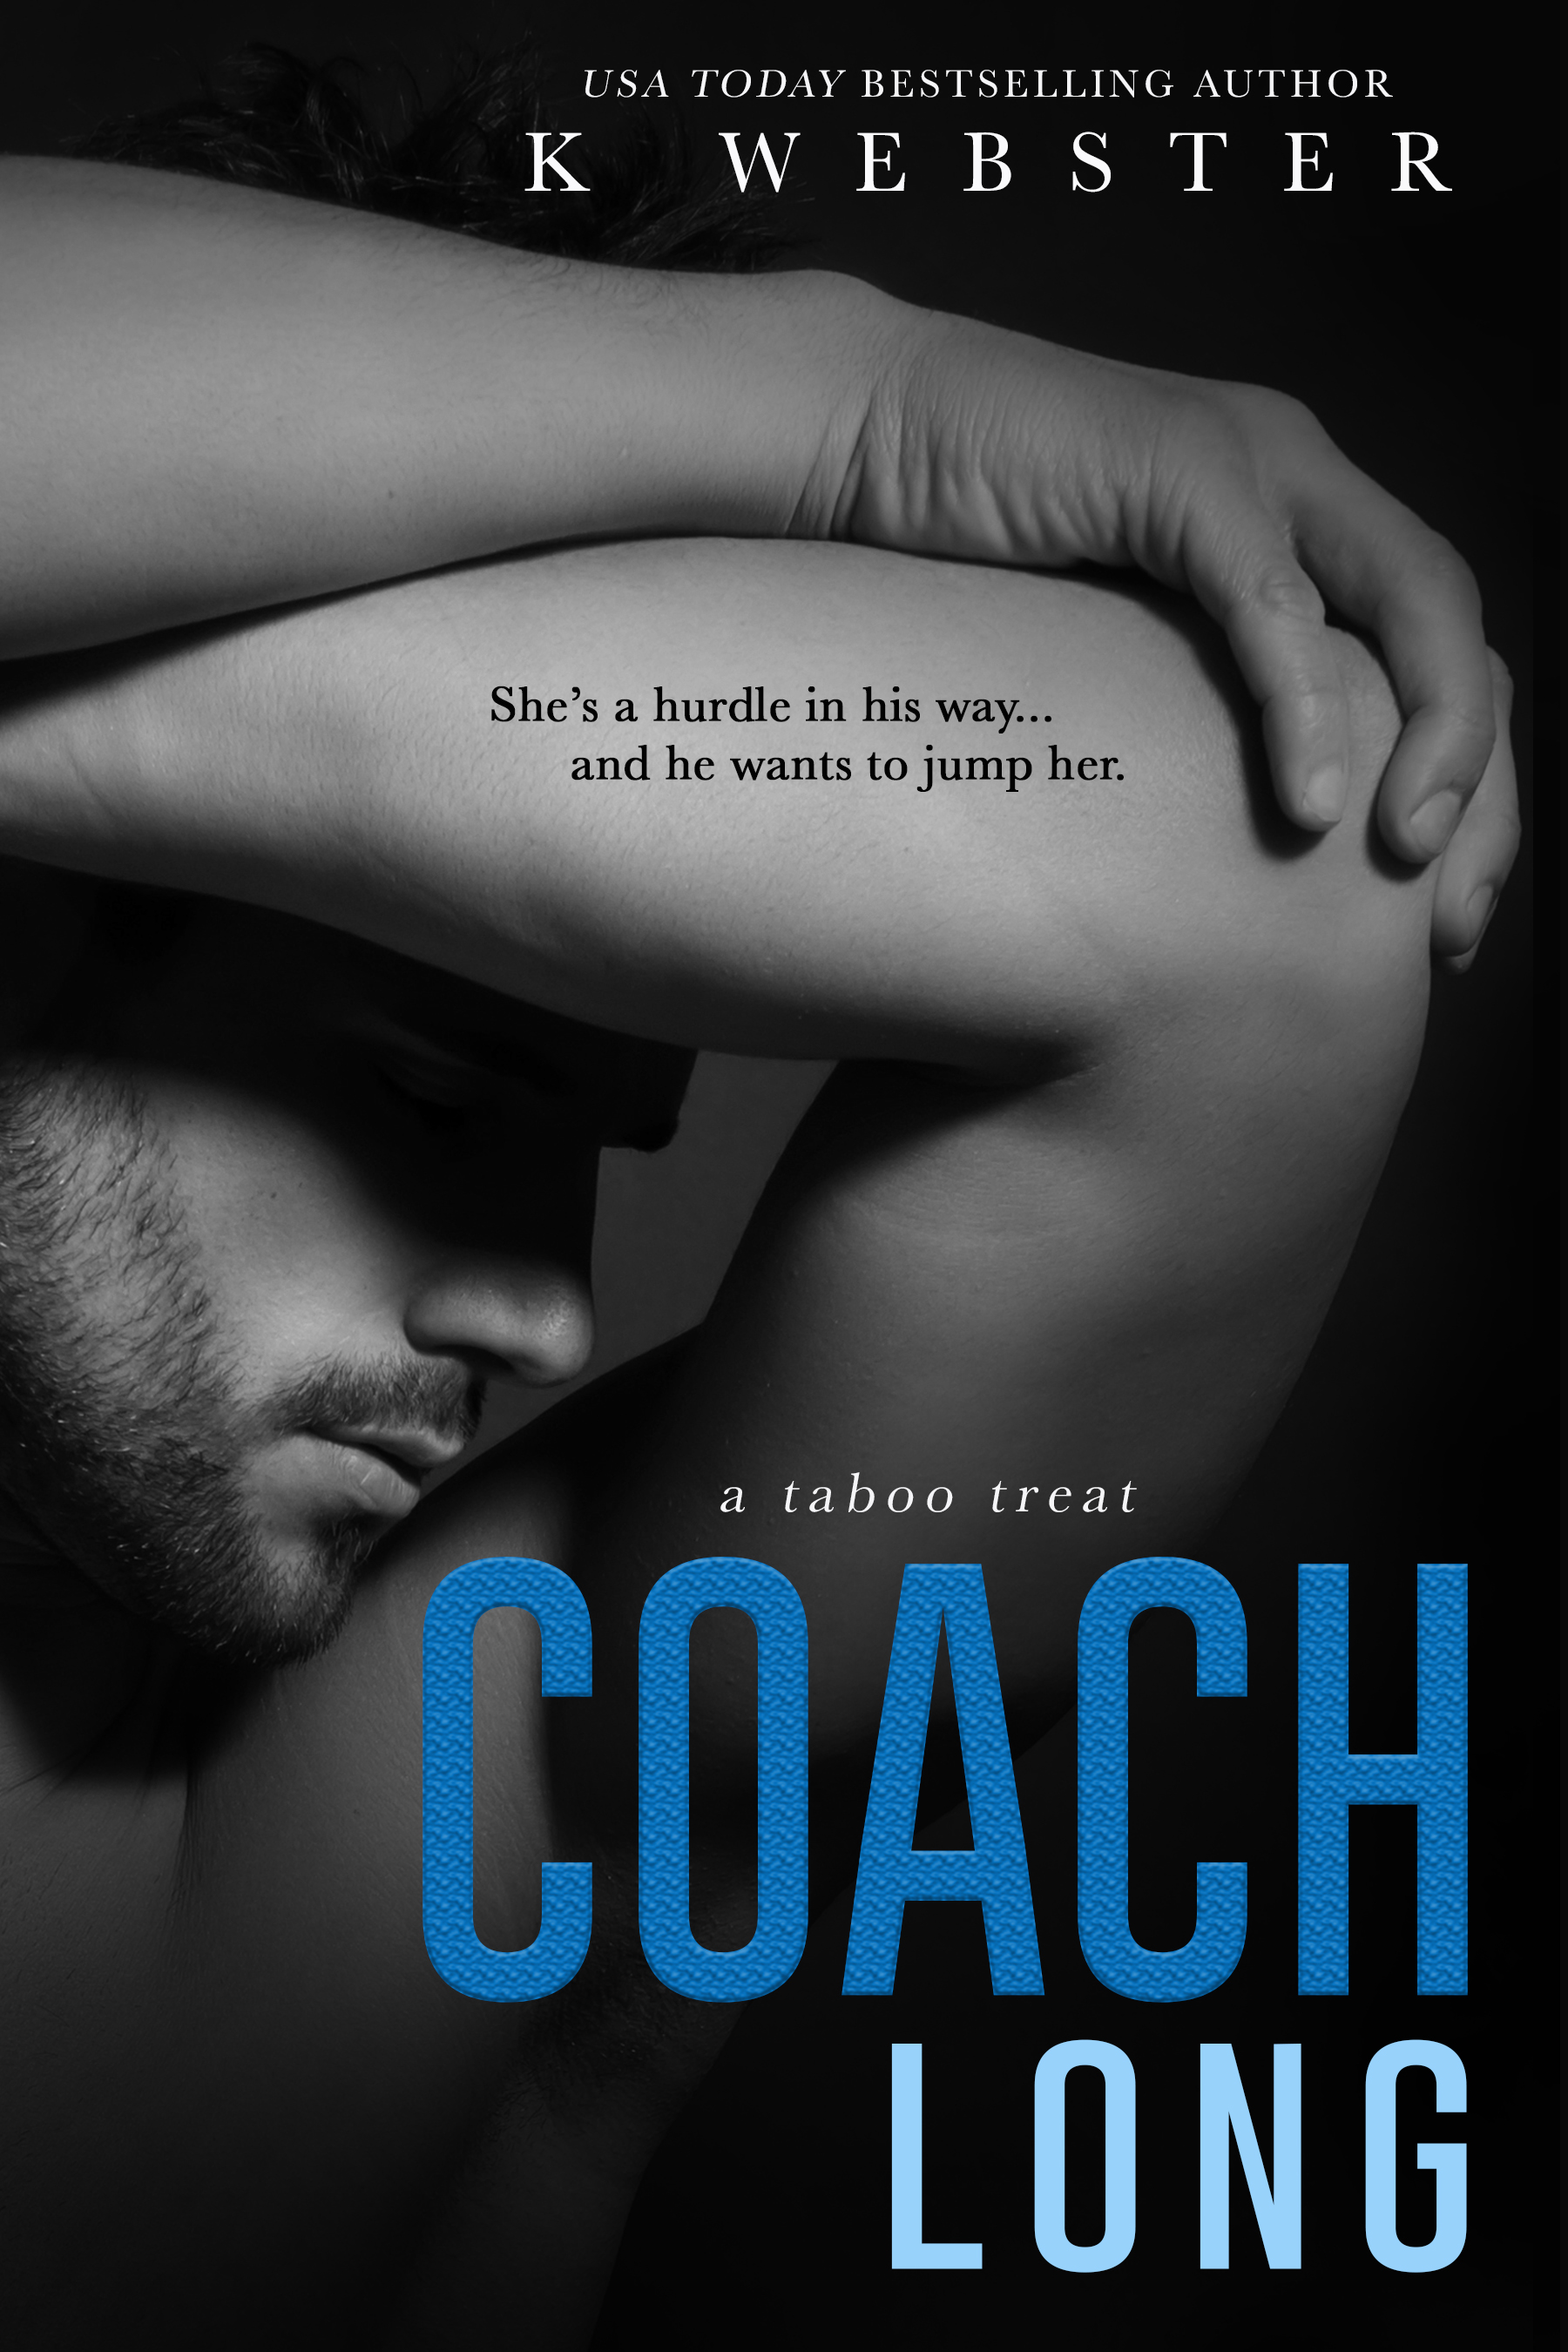 Coach Long by K. Webster [Cover Reveal]